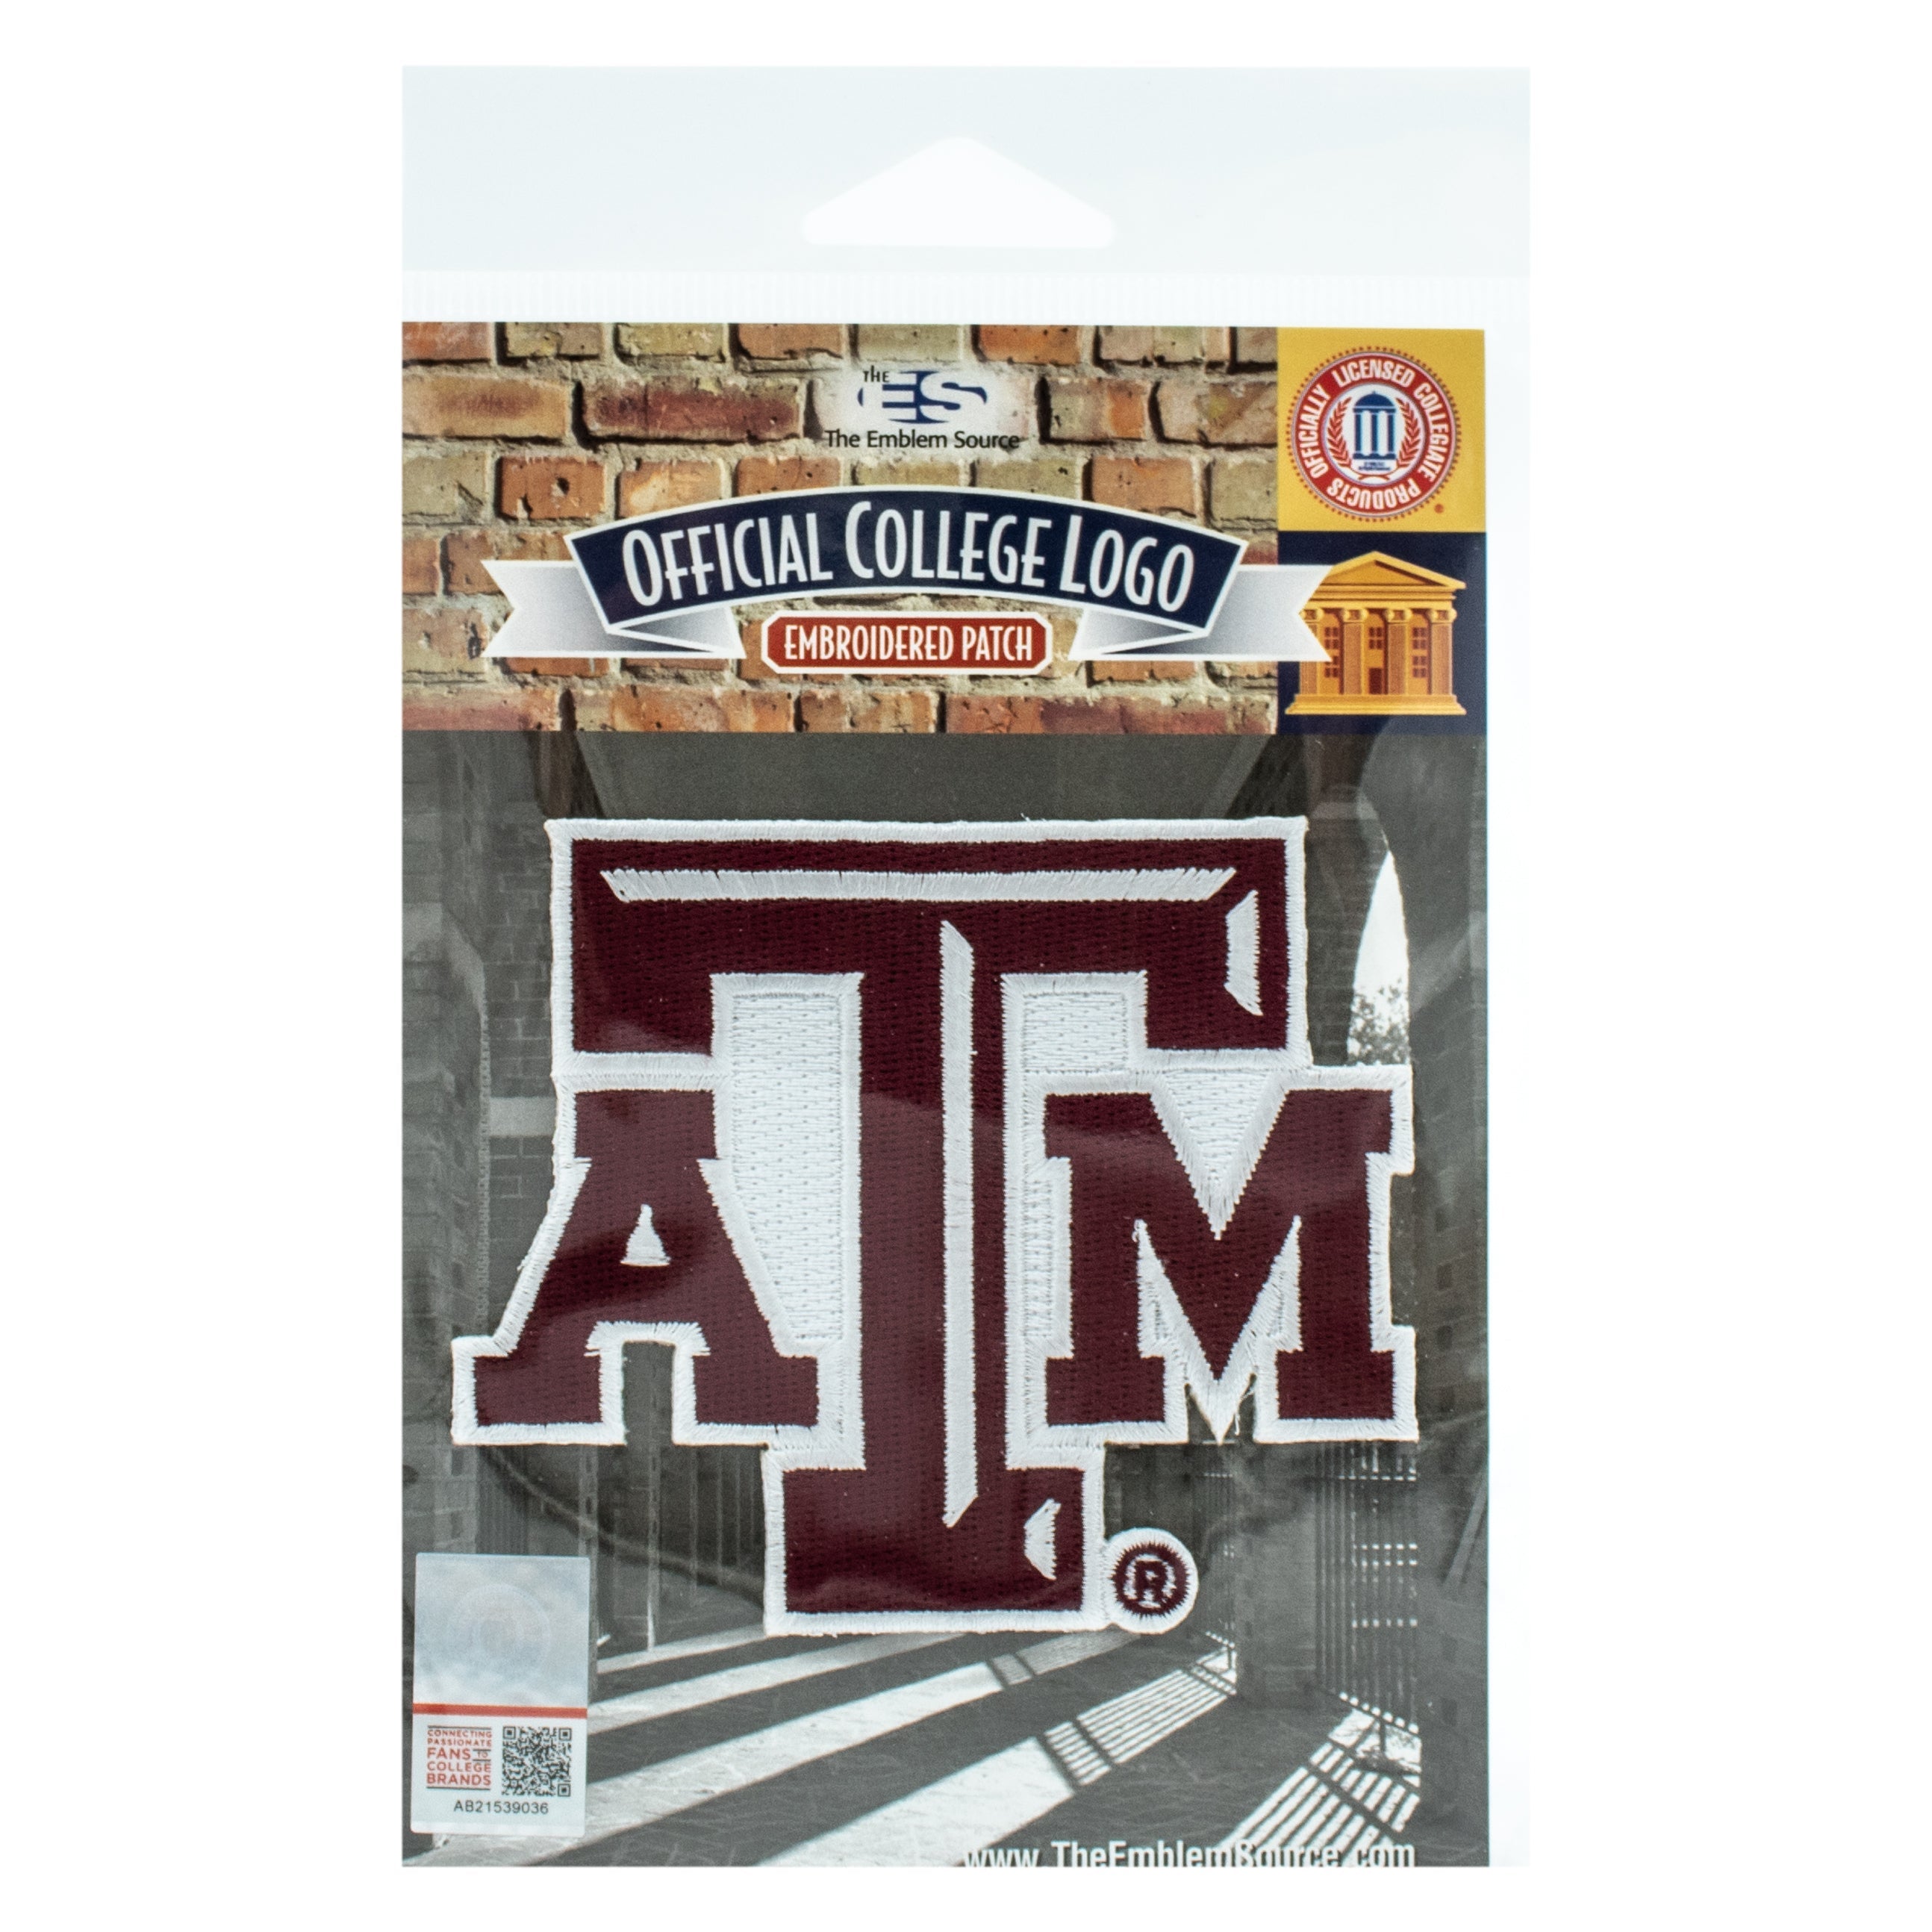  Texas Gig Em Yall Patch State Team Embroidered Iron On